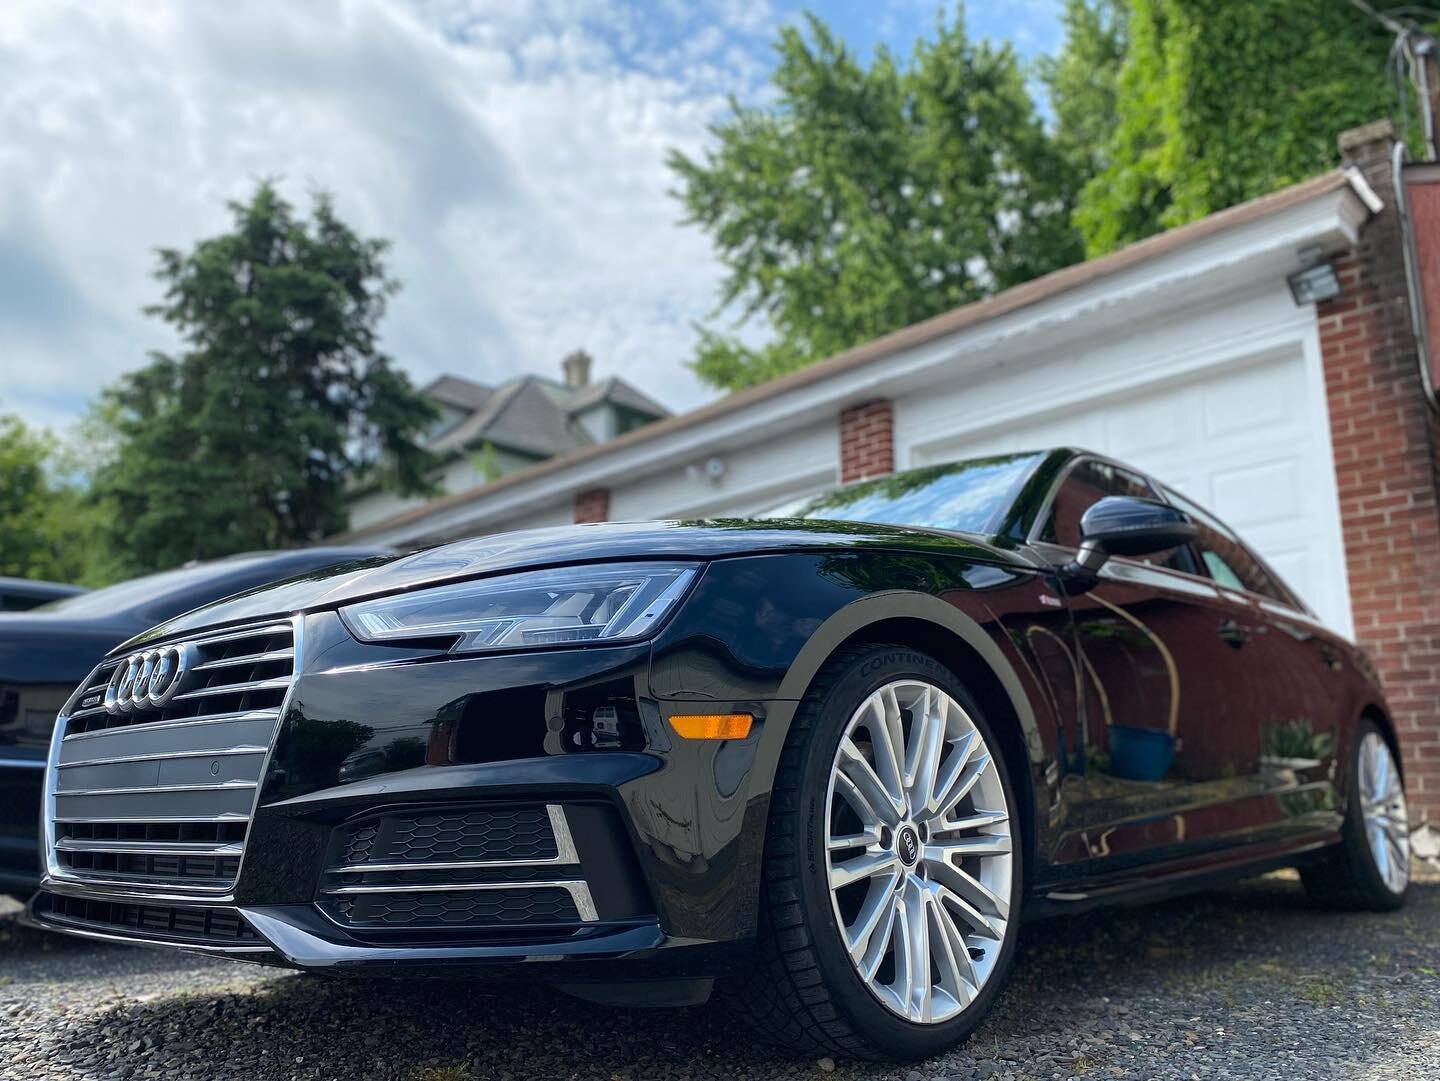 Audi A4 received our Level 1 Prep/Polishing package, in addition to receiving a coat of @igl_coatings_northamerica  Poly 1-Year paint coating. Reach out to schedule your vehicle for a choice of our many Ceramic/Graphene Coating options. 💎 
➖➖➖➖➖➖➖➖
